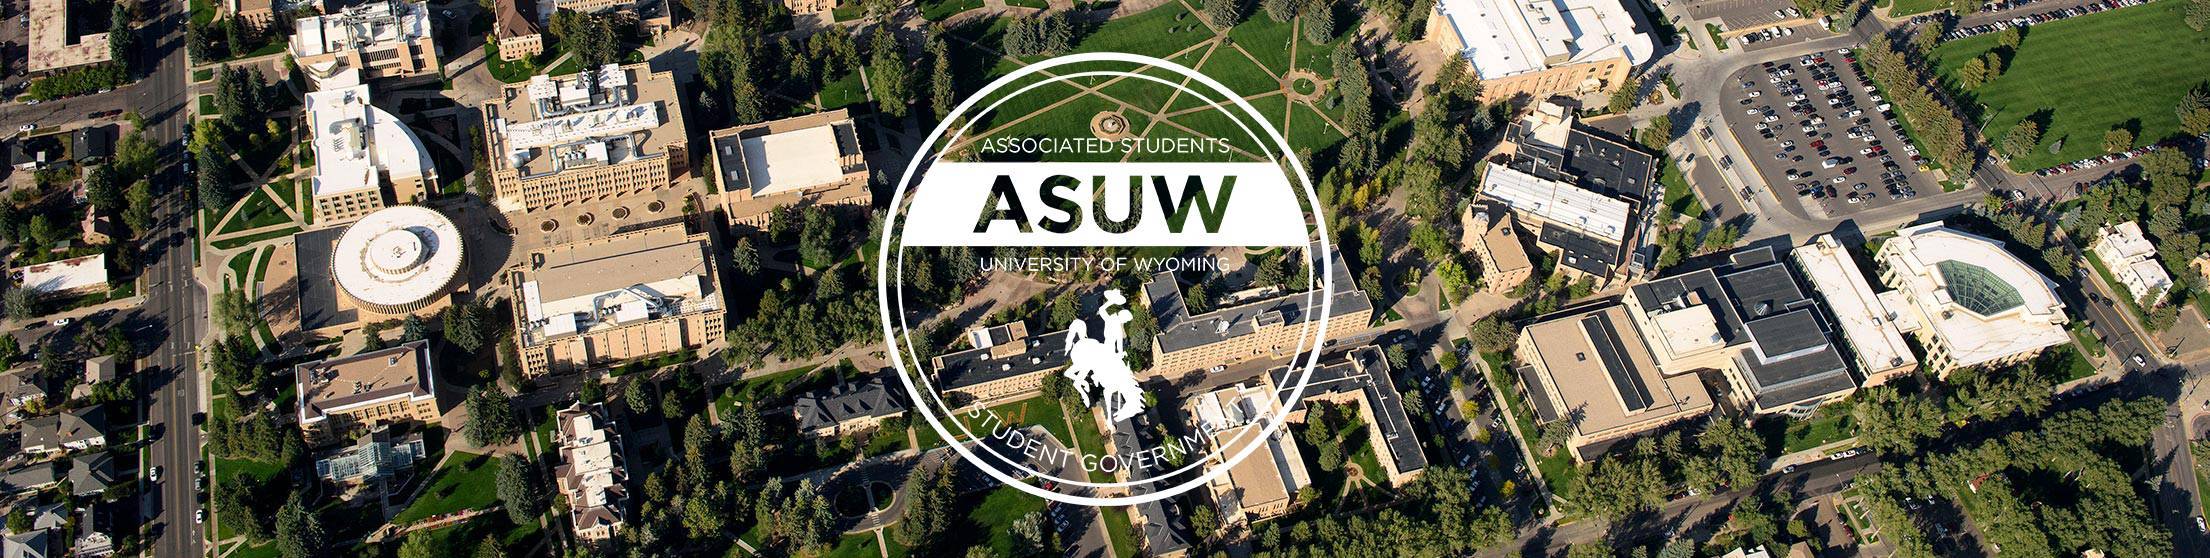 Aerial view of campus in the summer with ASUW logo